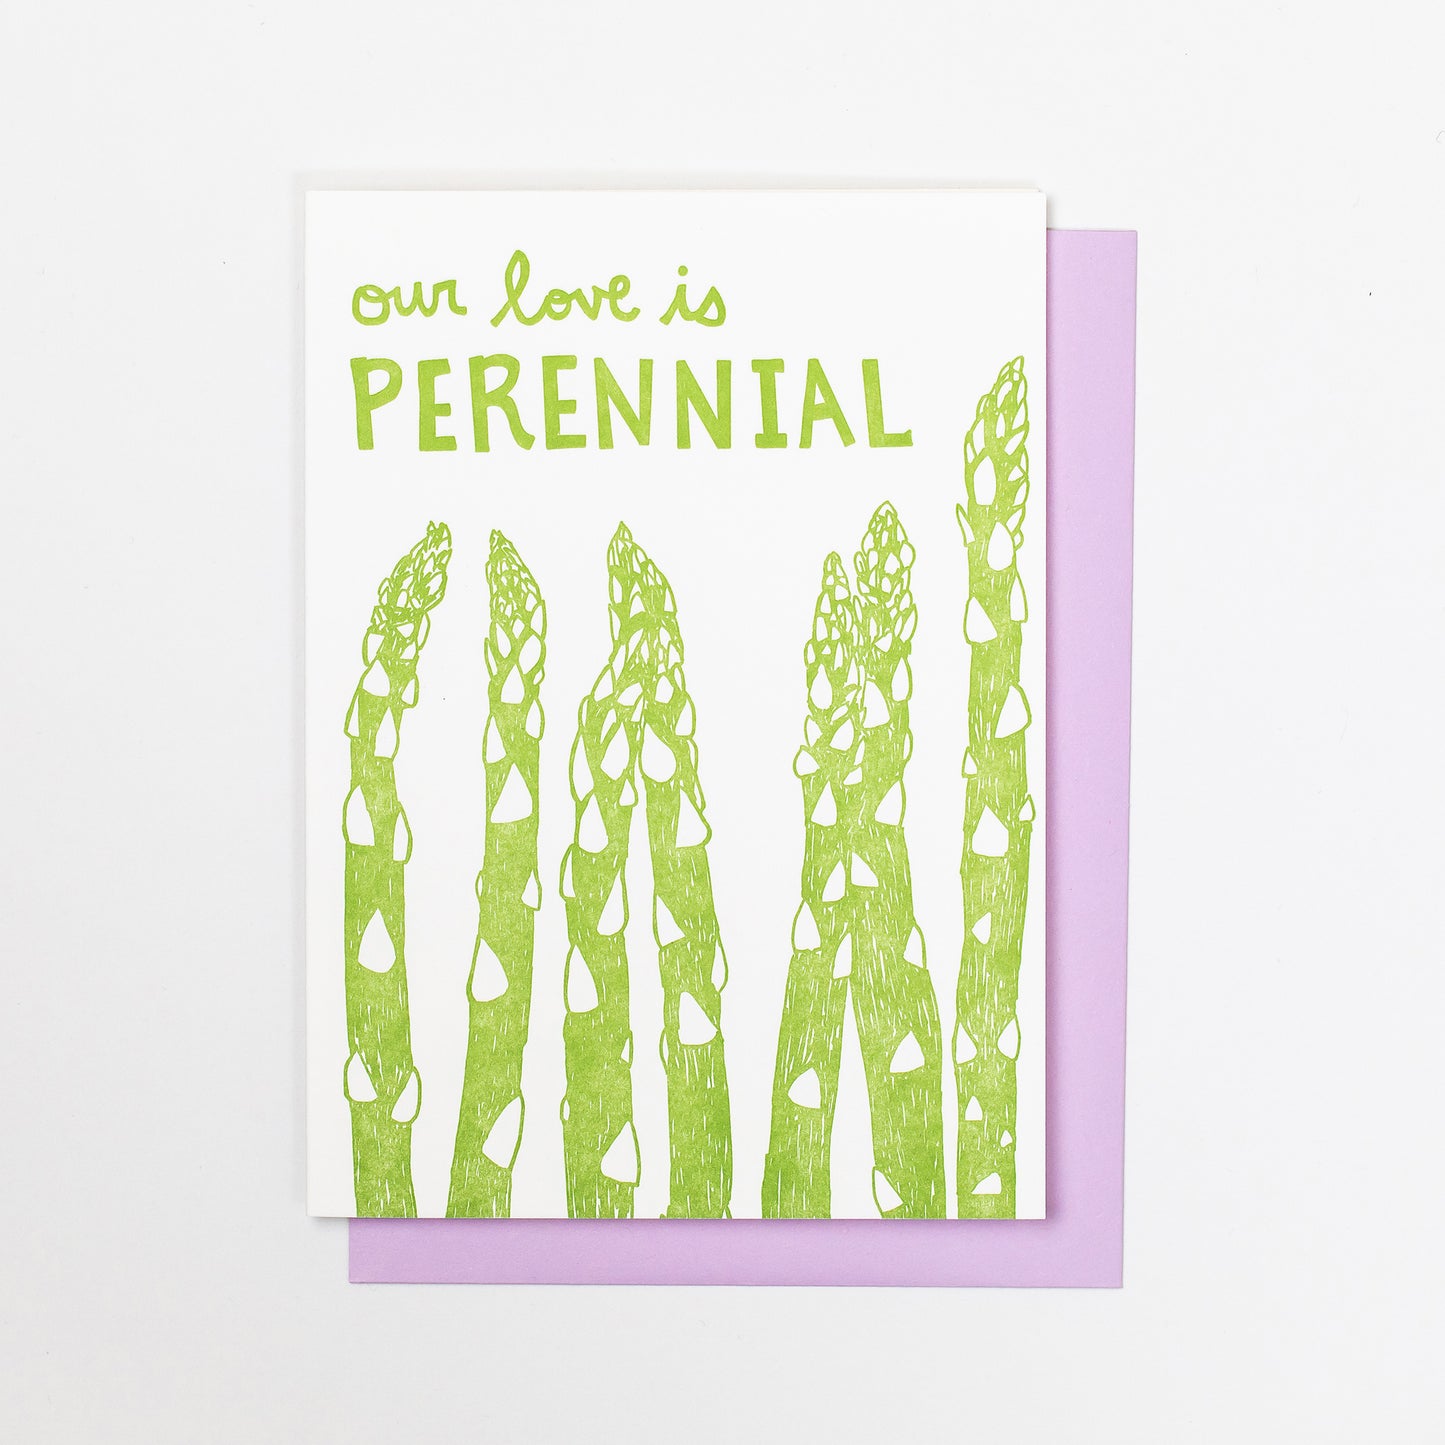 Letterpress greeting card featuring hand-drawn asparagus stalks, printed in a vibrant green ink. The top of the card says "Our love is perennial" in a whimsical hand-drawn text, in the same green ink. The card is white, blank inside, and is paired with a lilac purple envelope.